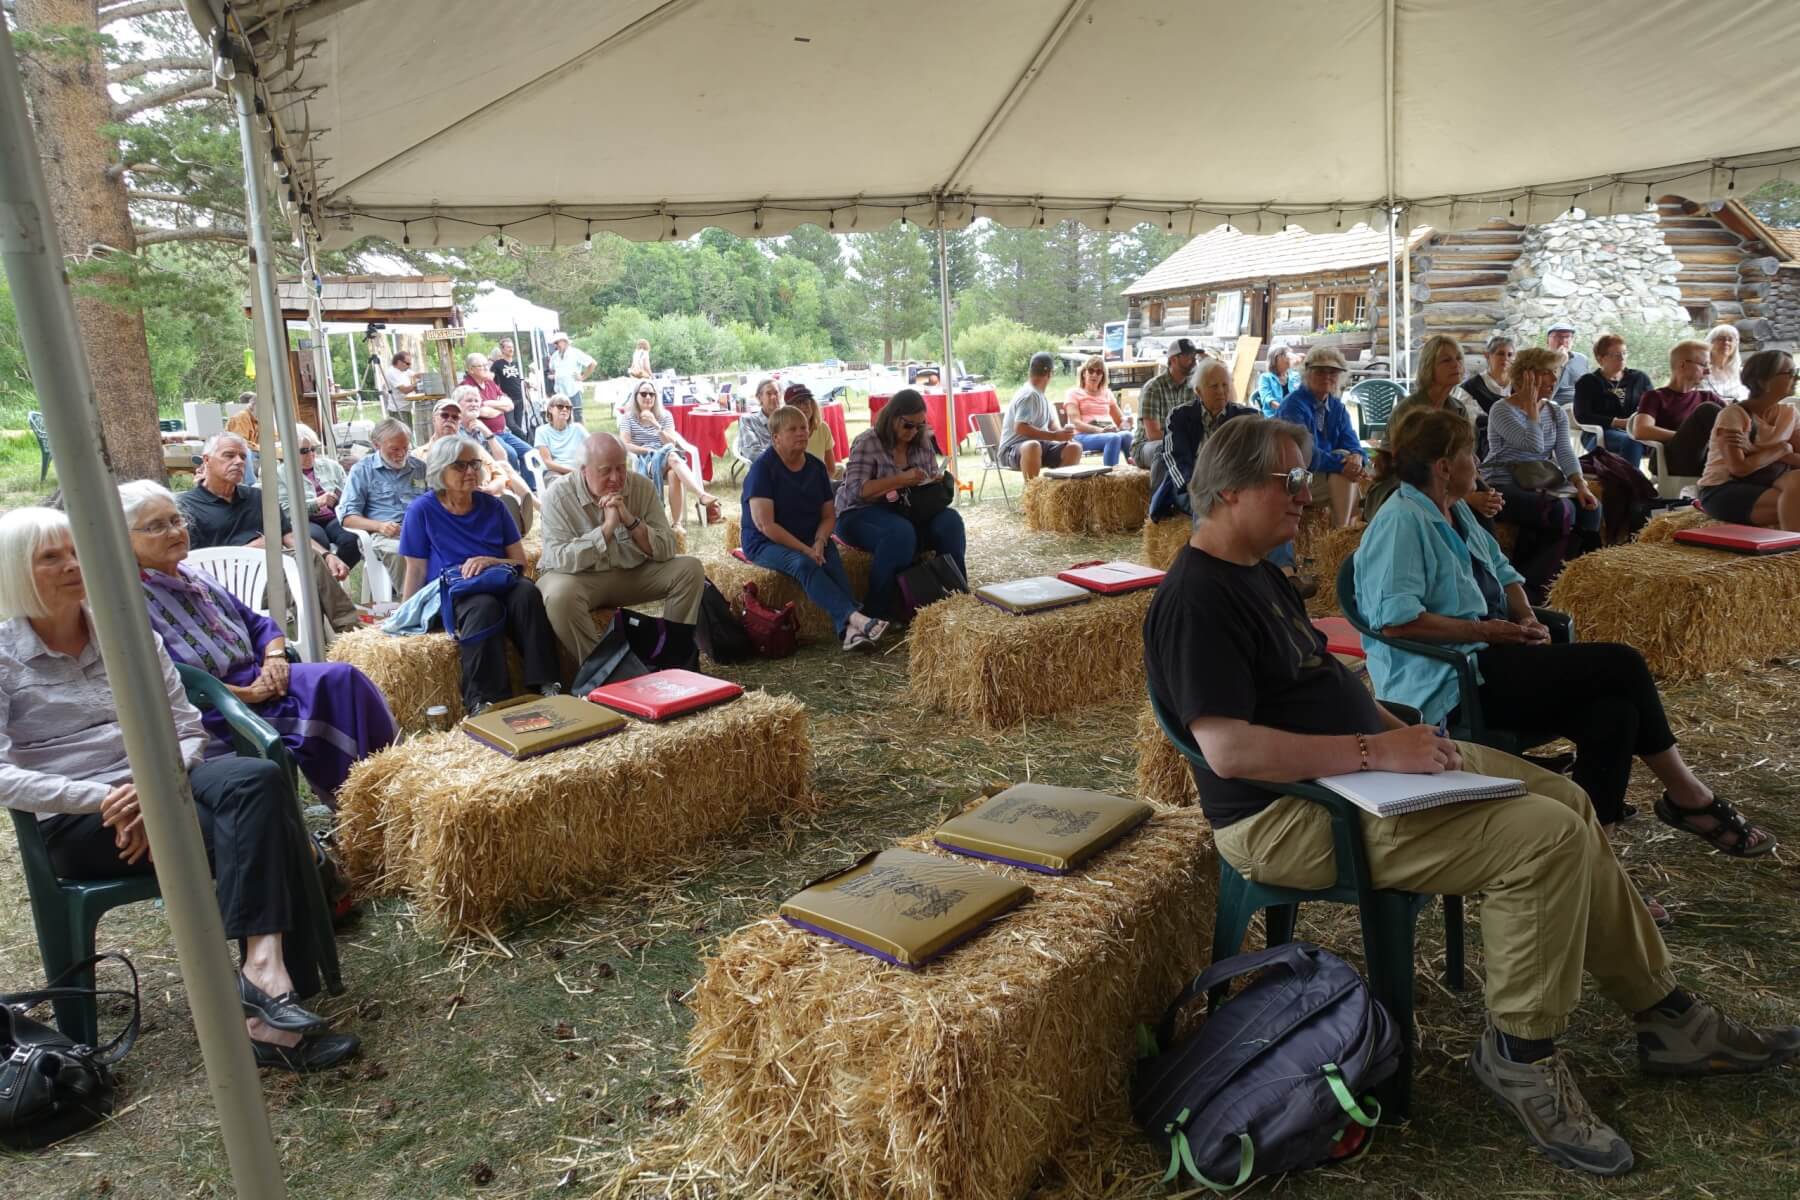 Picture of book festival attendees holding books and sitting on haystacks under a canopy.